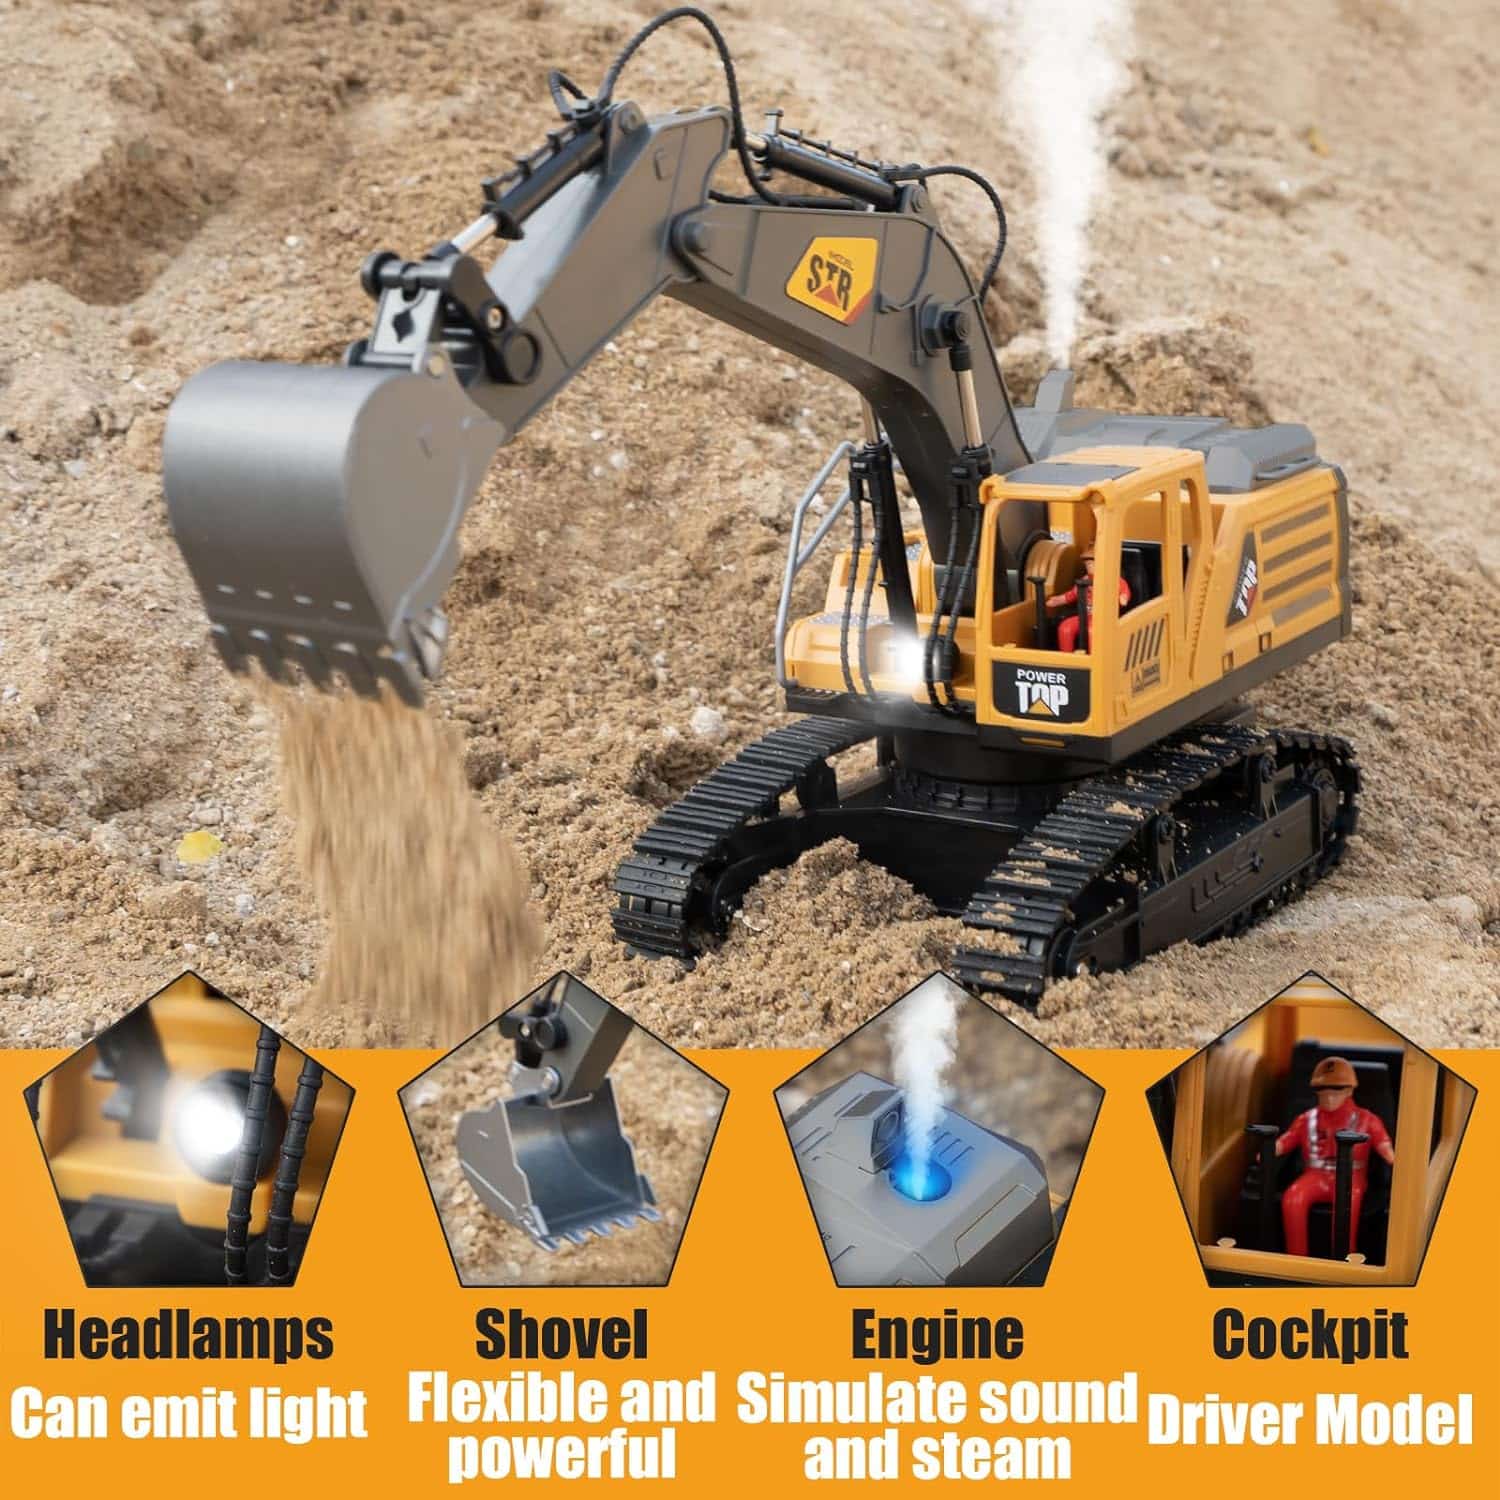 KASQERT Remote Control Excavator Toys for Boys: A Fun and Realistic Construction Experience